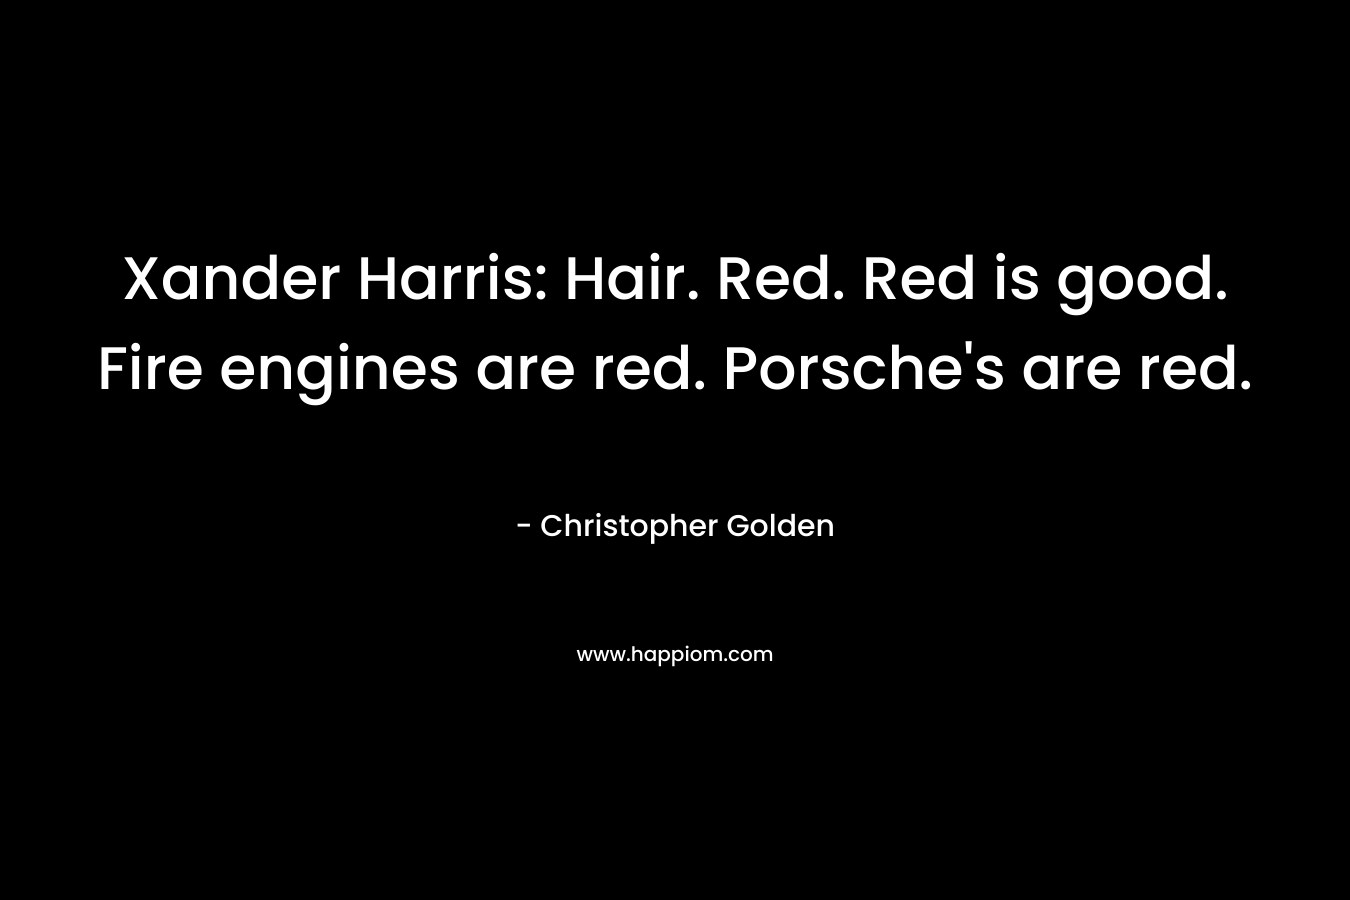 Xander Harris: Hair. Red. Red is good. Fire engines are red. Porsche's are red.